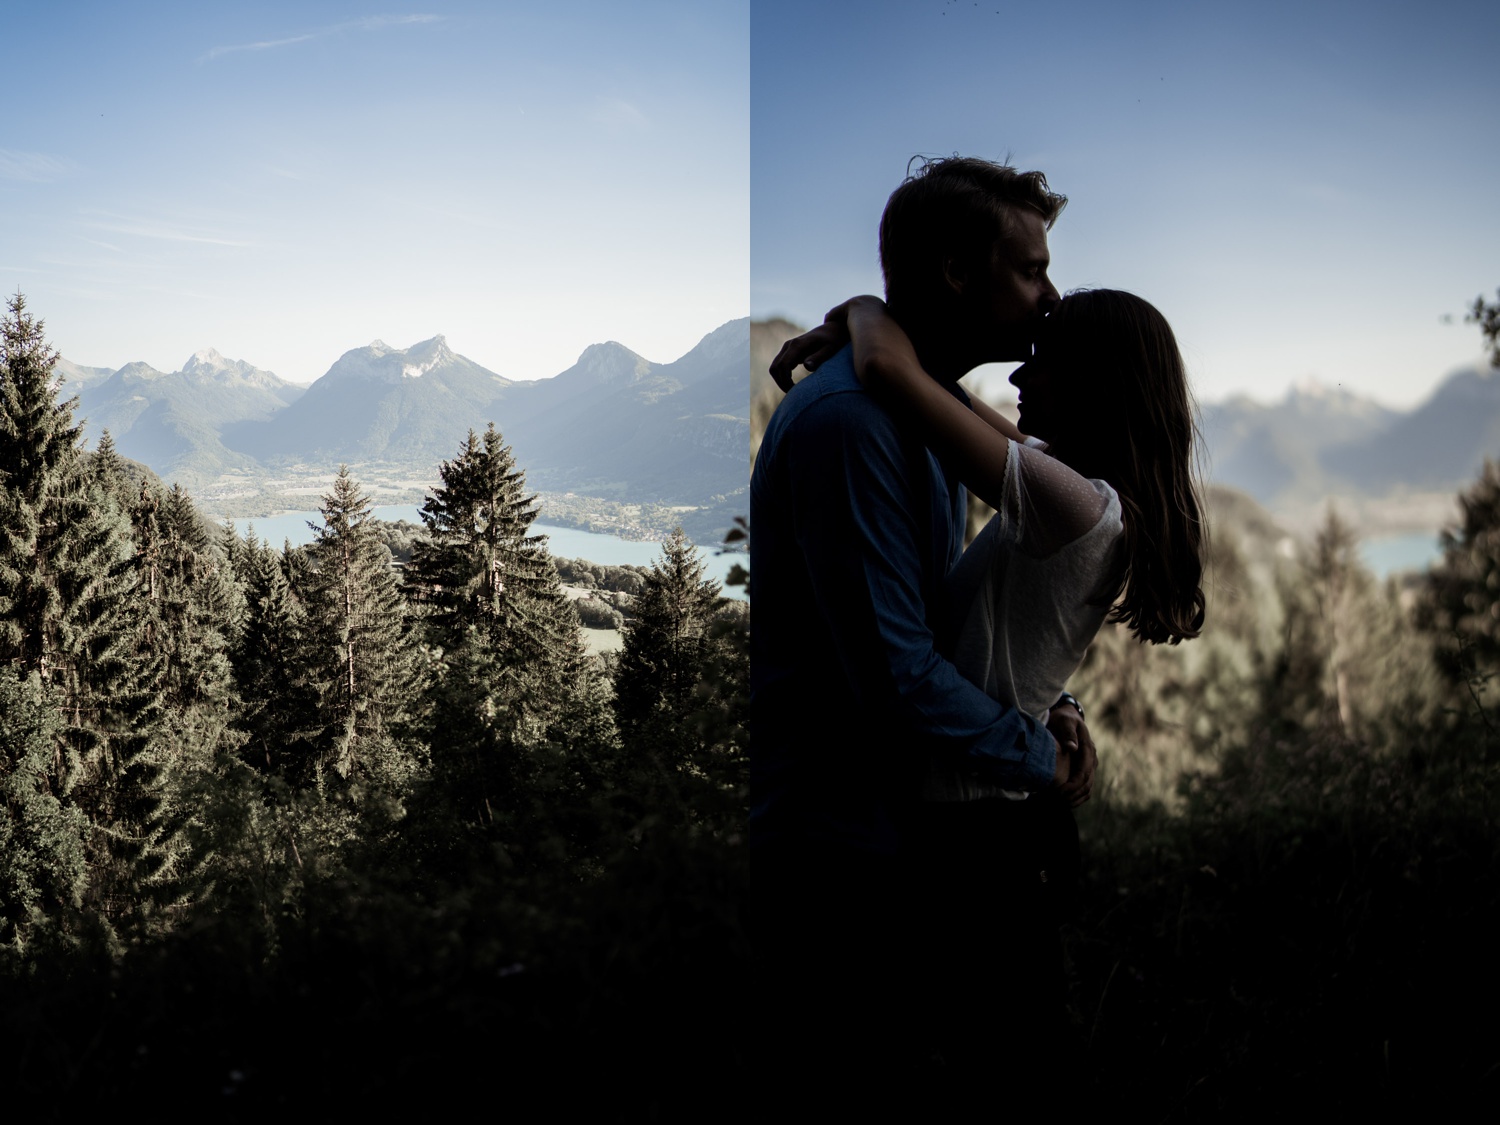 photographe_mariage_engagement_annecy